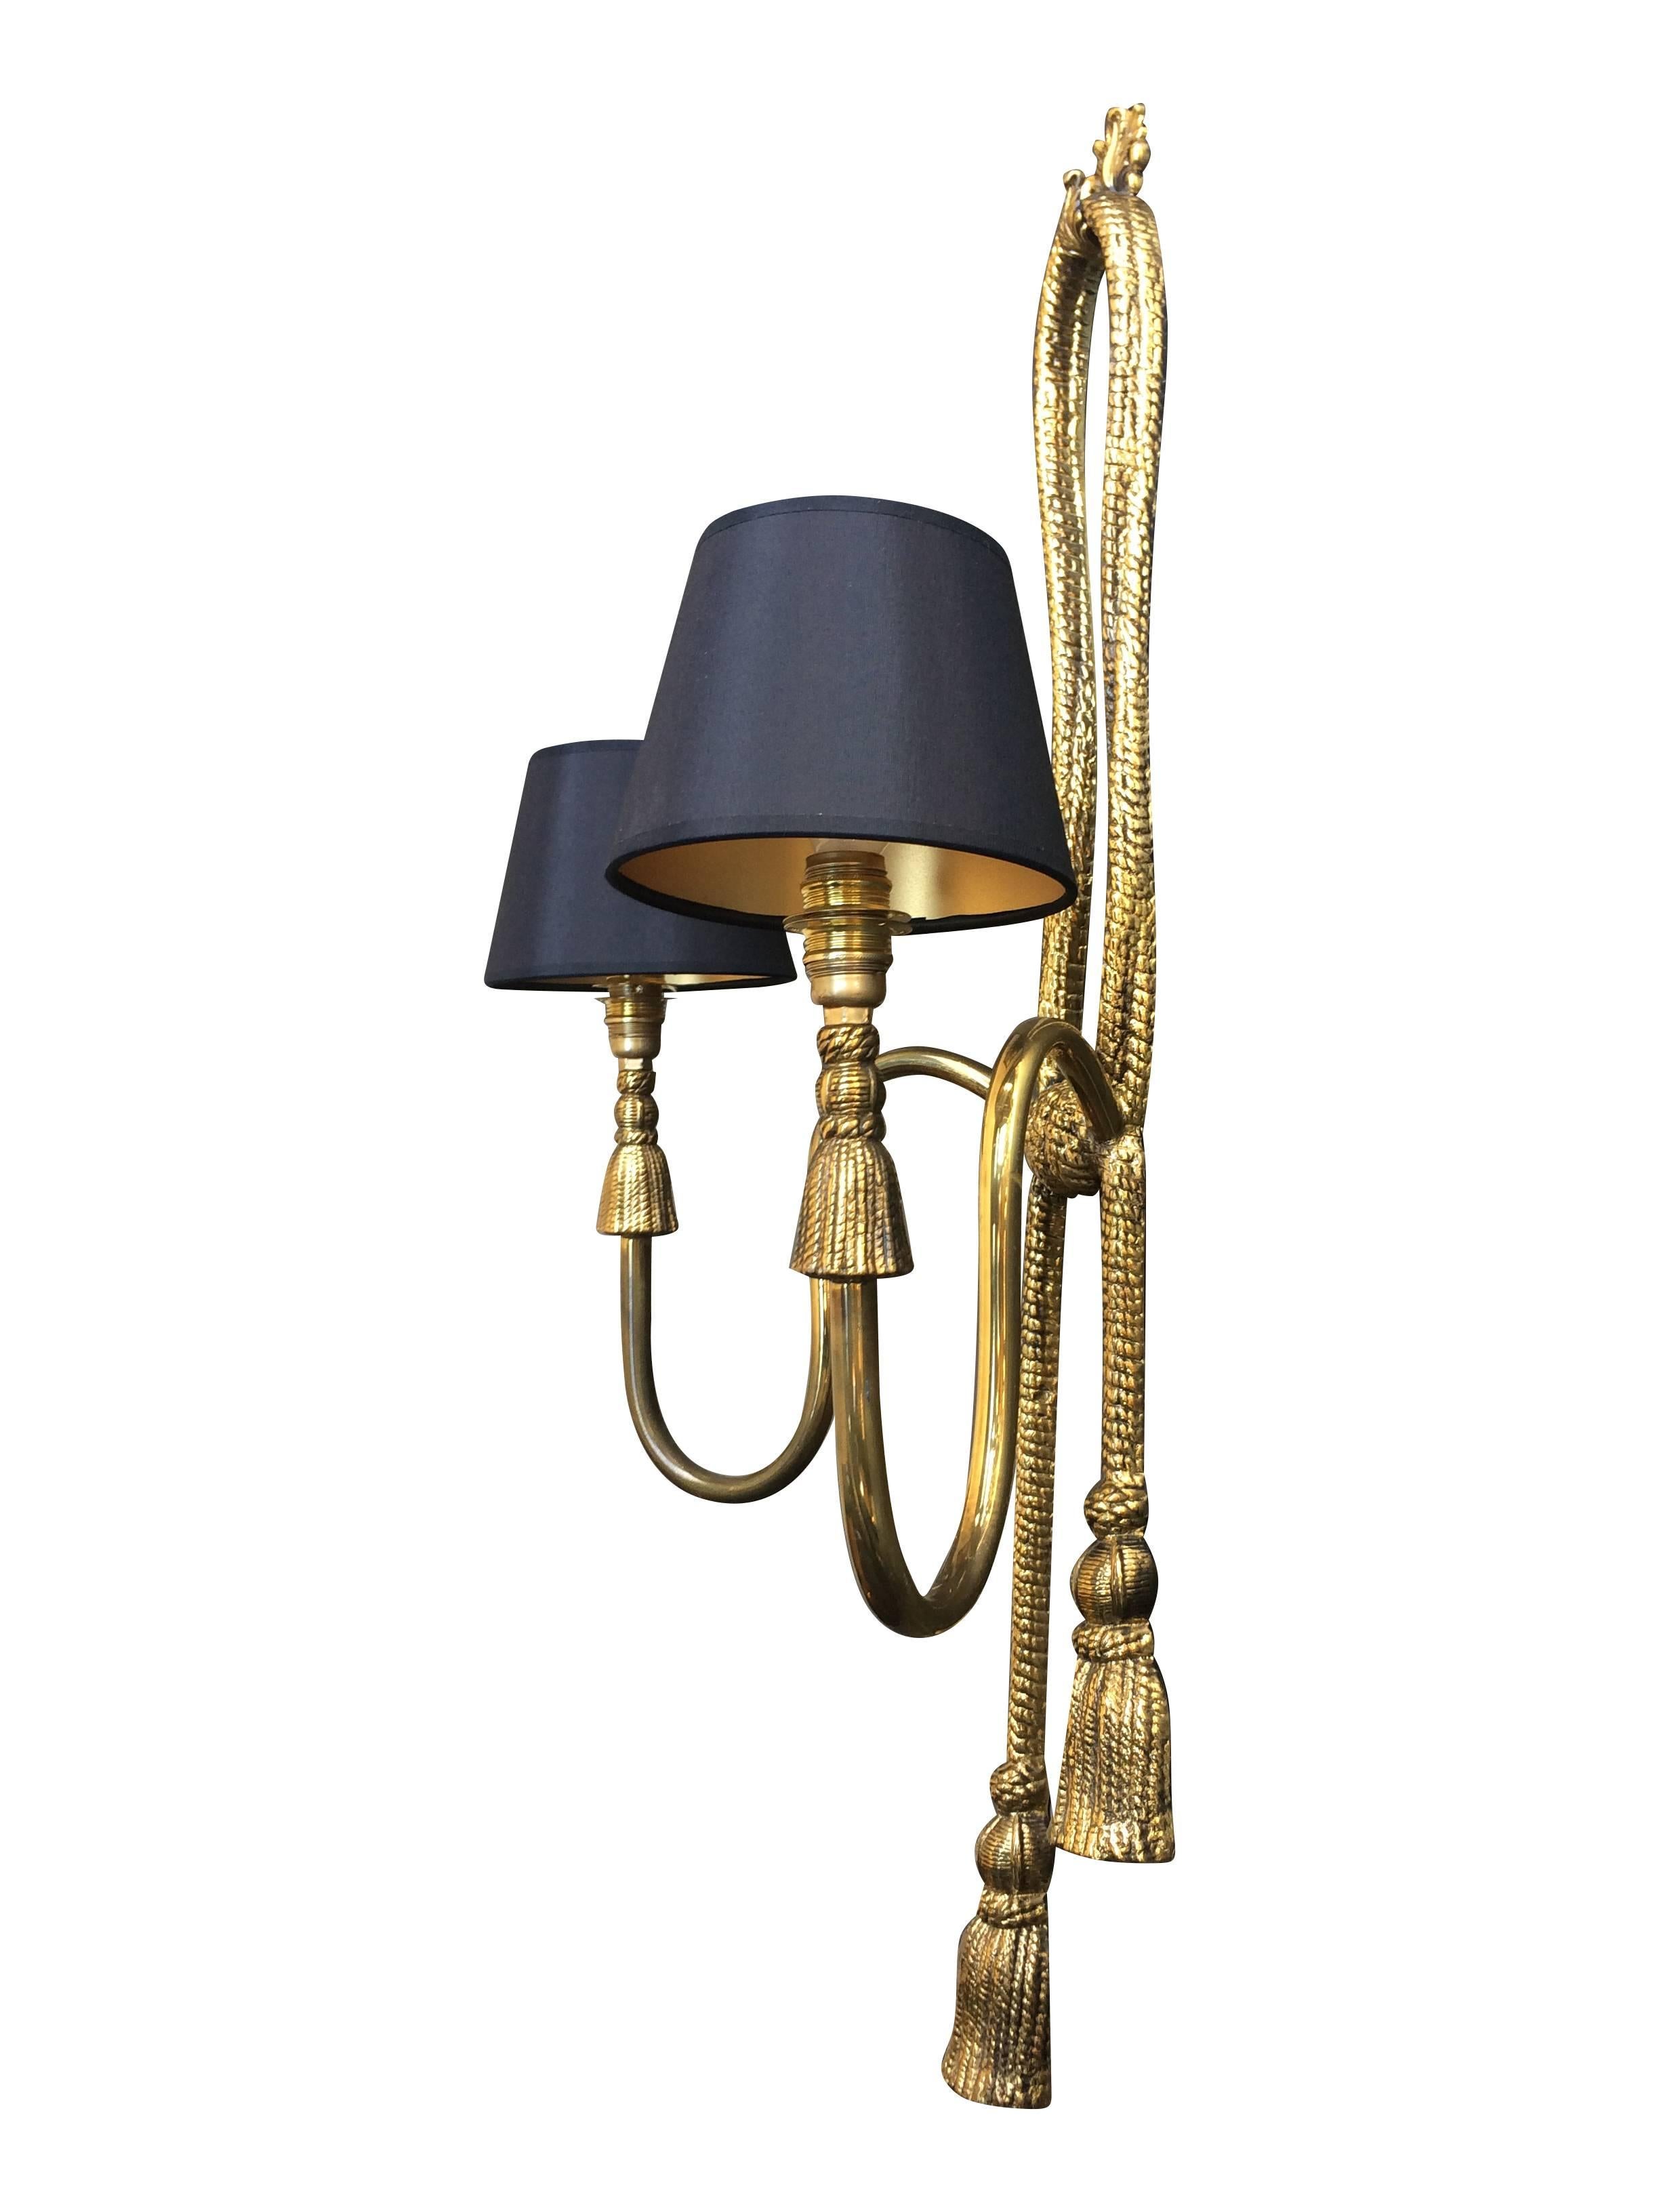 Spanish Pair of Large Valenti Brass Rope and Tassle Wall Lights